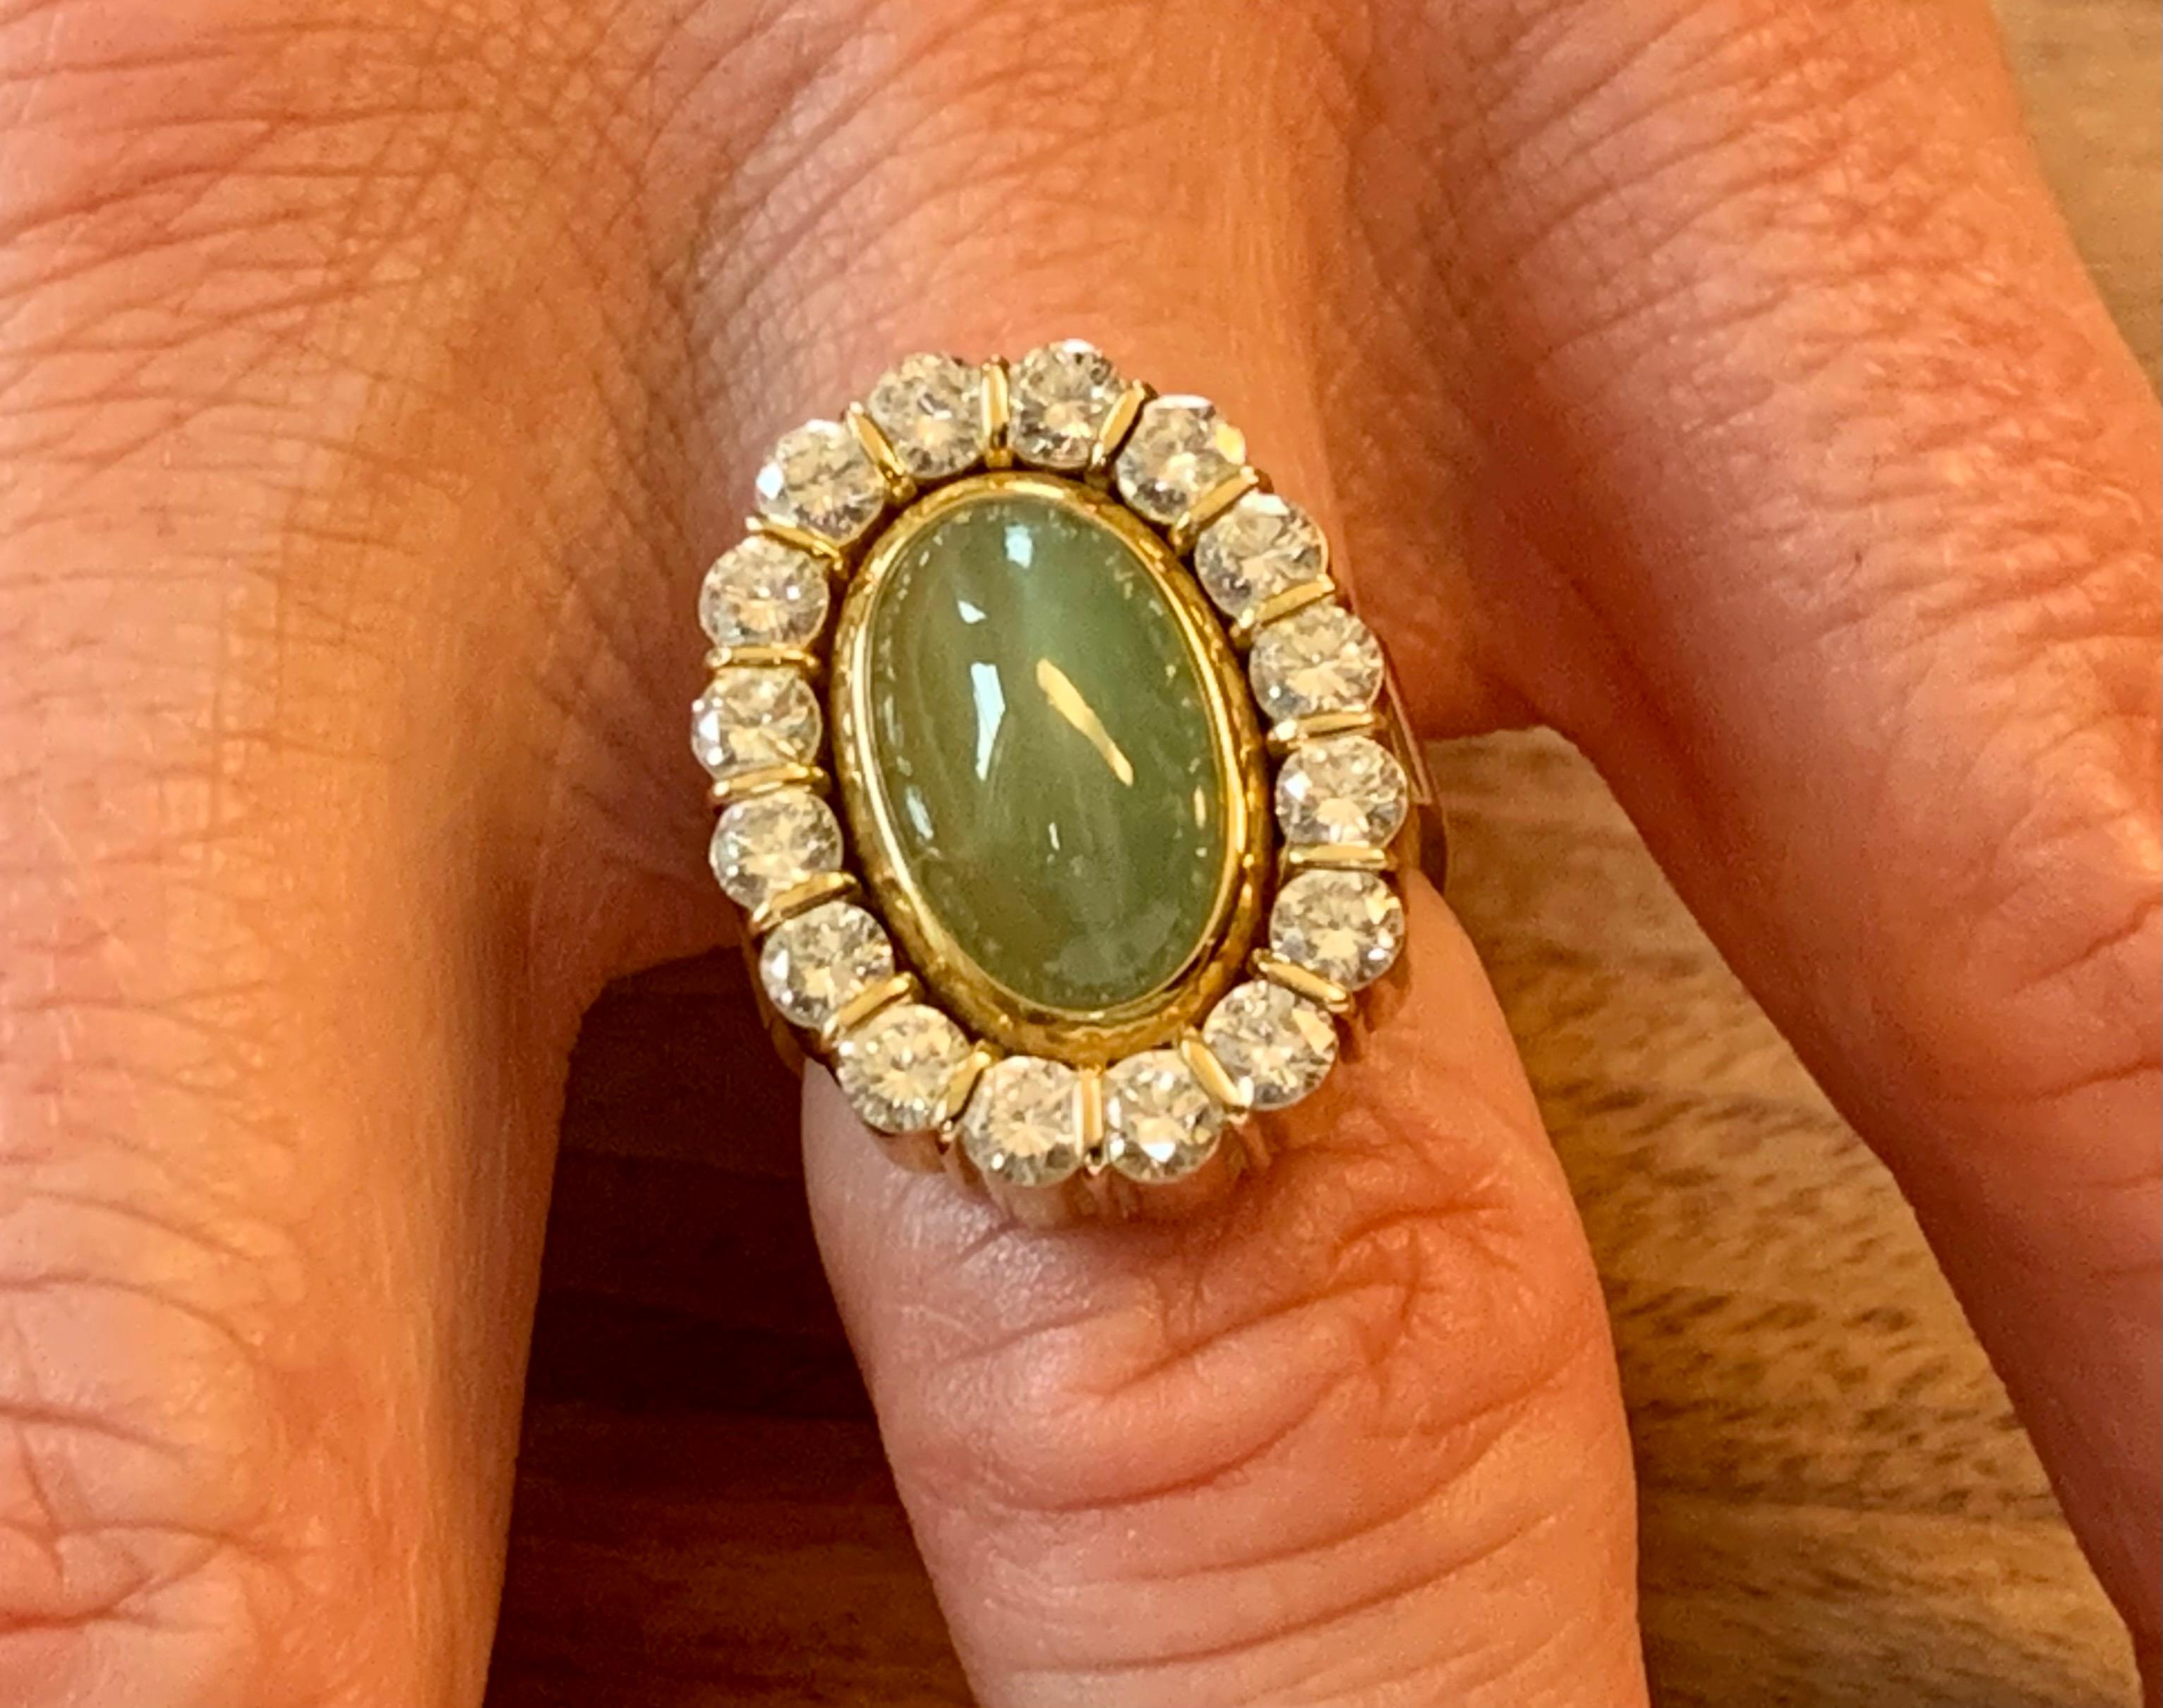 Solid and one of a kind ring in 18 K yellow Gold by the swiss company A. Kurz set with a greenish yellowish cat's eye Chrysoberyl Cabochon weighing approximately 5.0 ct surrounded by 16 brilliant cut Diamonds totalling ca. 1.60 ct, G color, vs